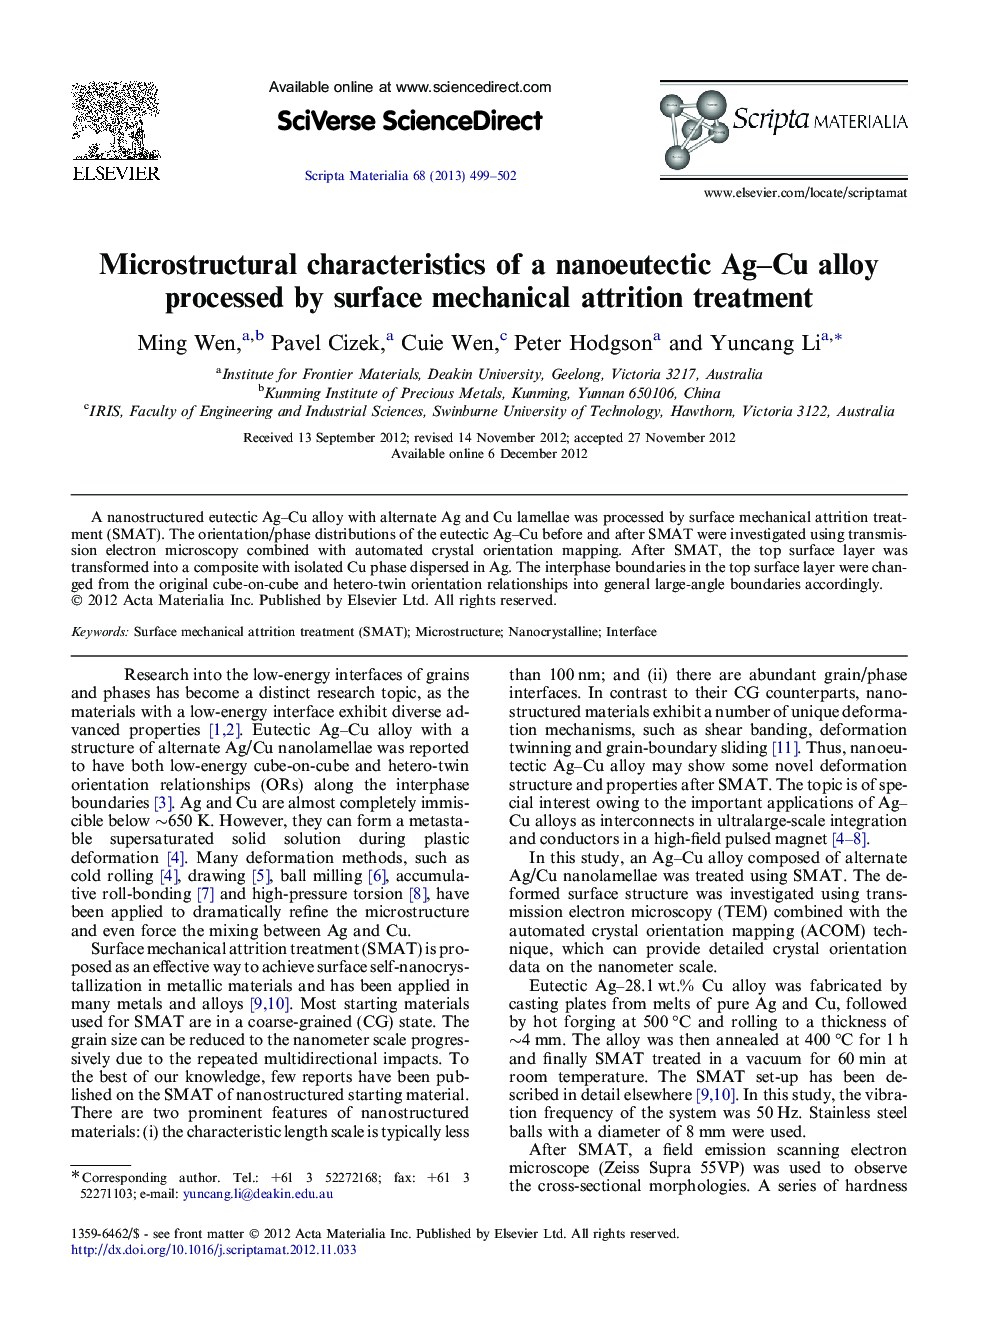 Microstructural characteristics of a nanoeutectic Ag–Cu alloy processed by surface mechanical attrition treatment